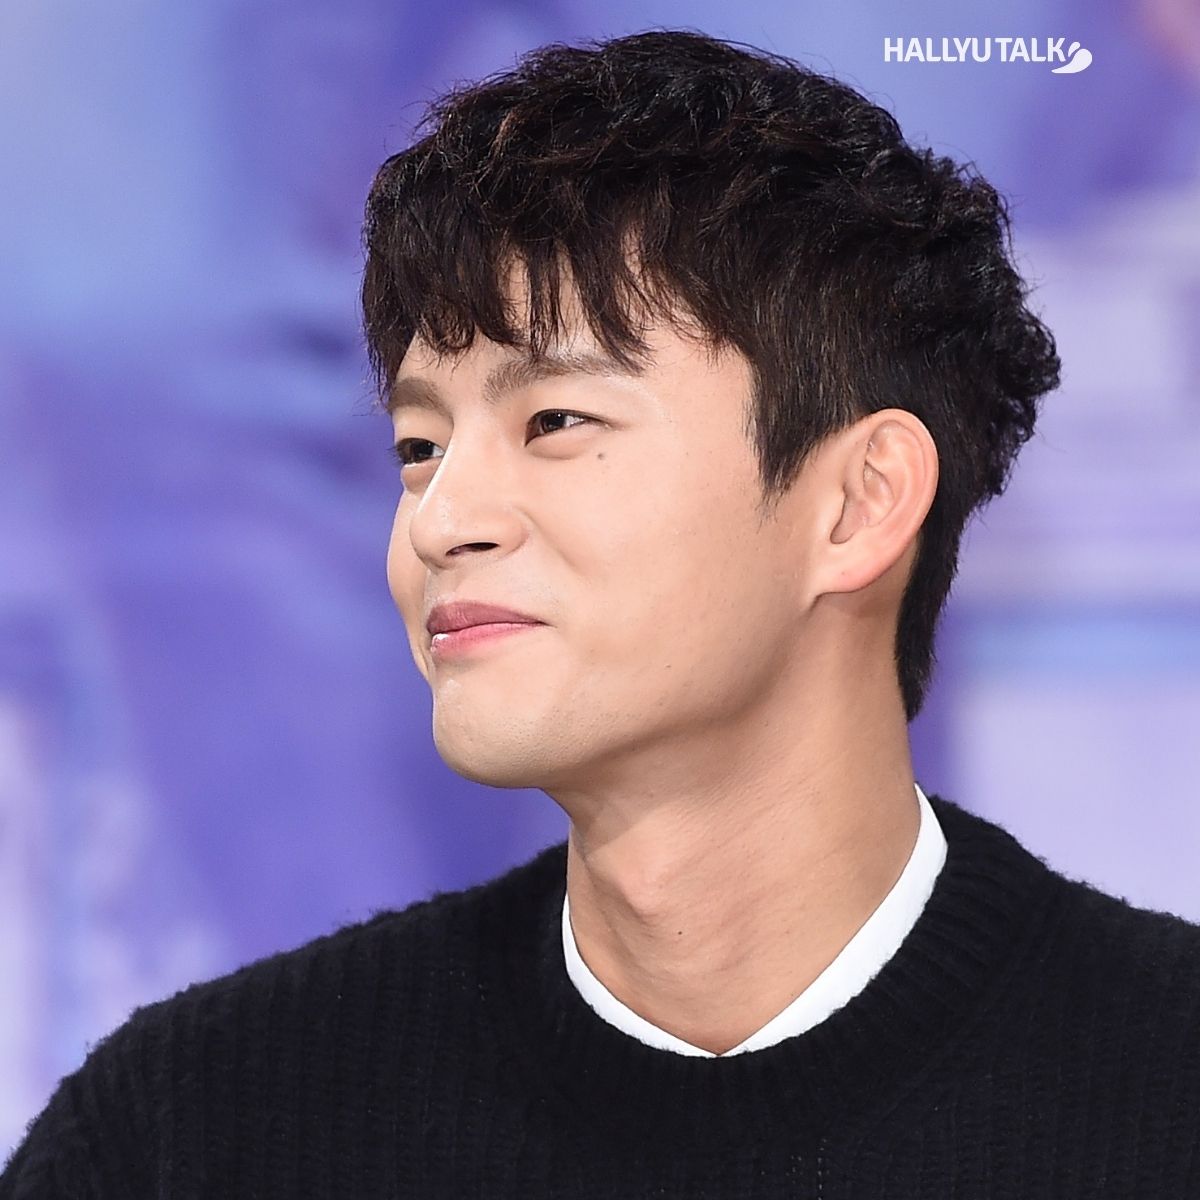 Seo In Guk talks about his unconventional beauty; Says he has a ‘weird face’